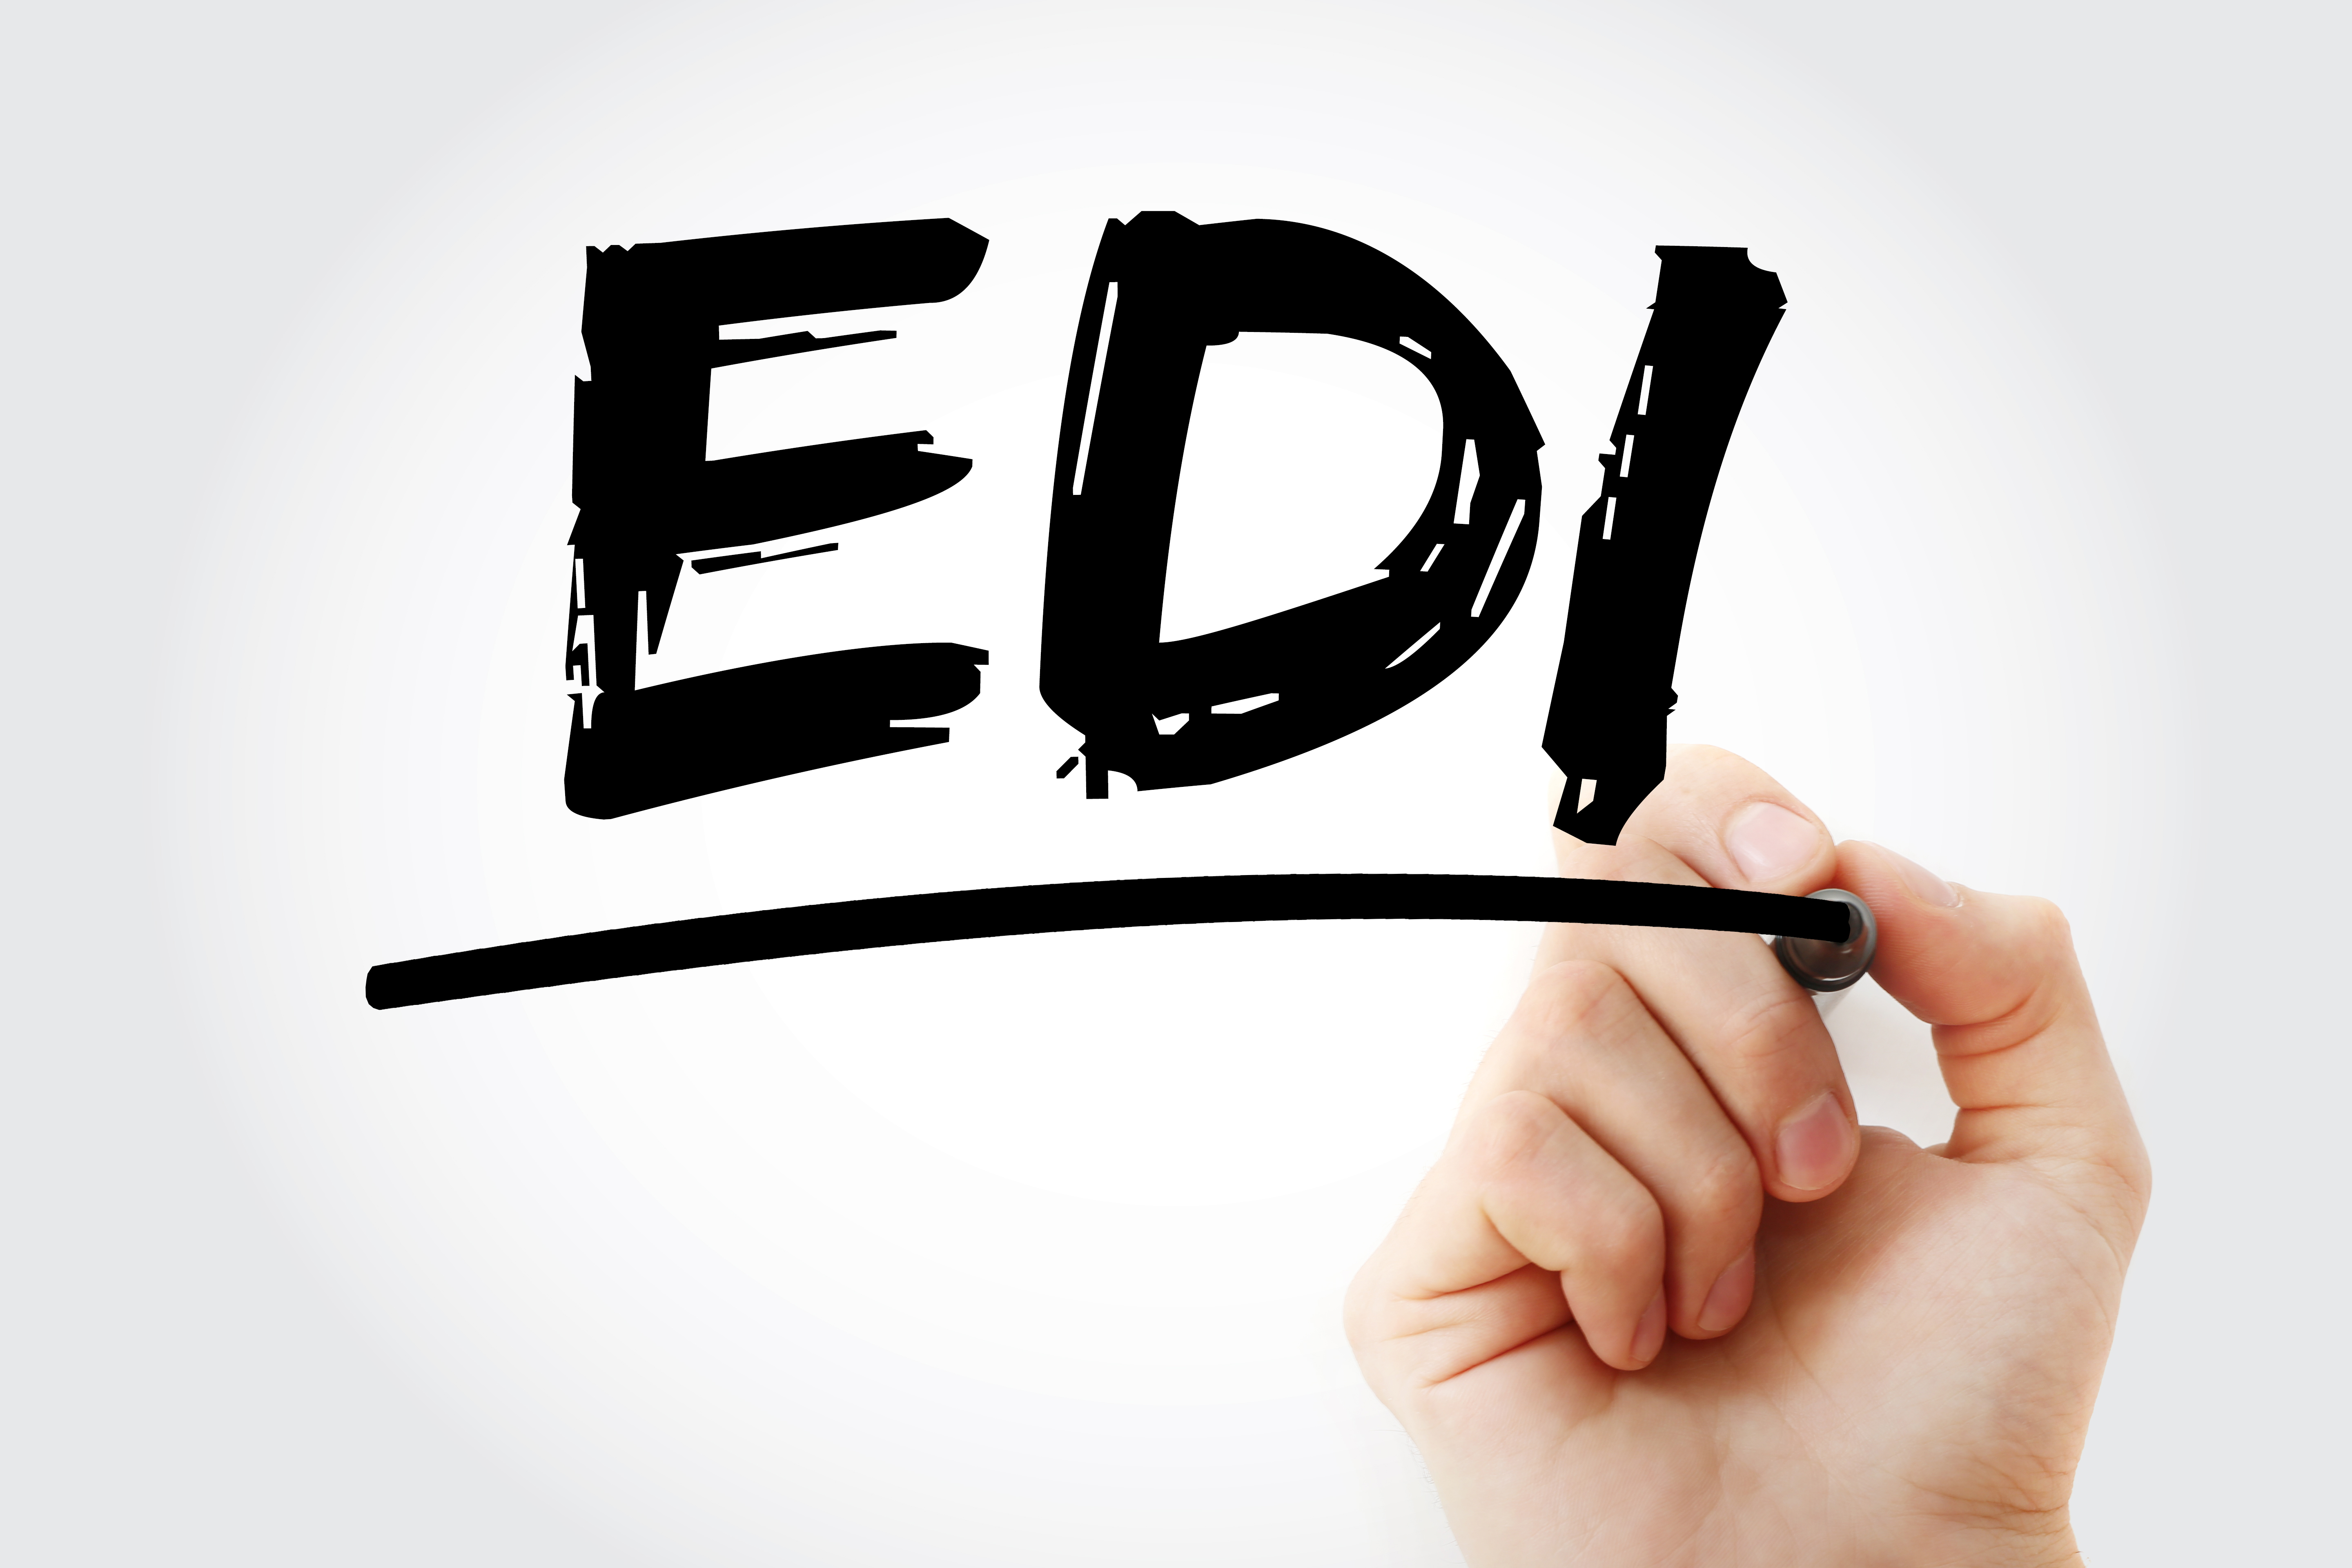 EDI can offer great benefits for organizations looking to streamline their accounting processes. In this Invoiced blog post, we cover the foundations of EDI.